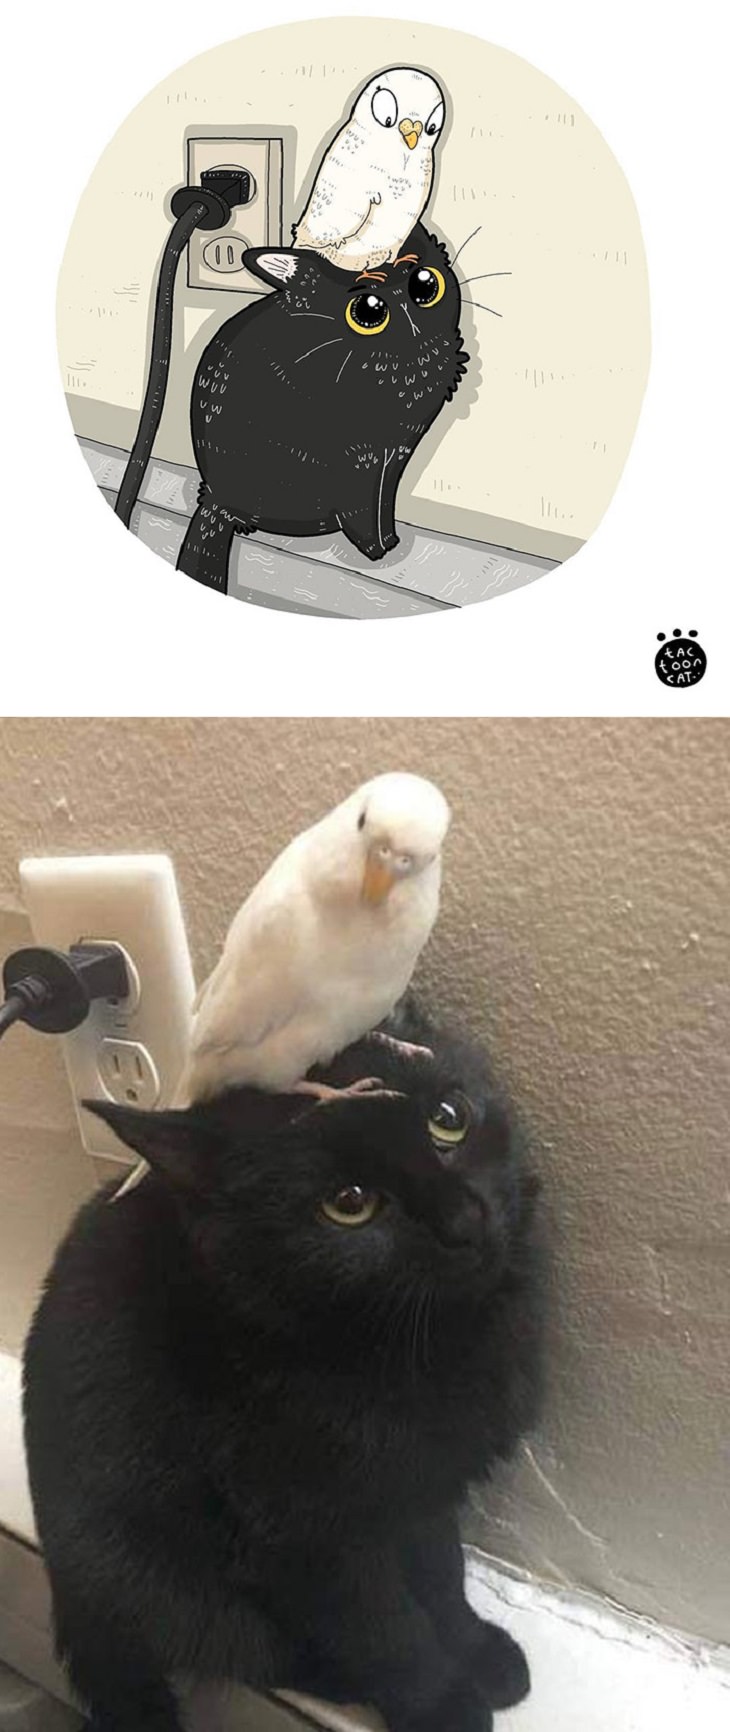 Cartoons of famous funny internet cats by Indonesian artist Tactooncat, Illustration and picture of a black cat with a white bird on its head